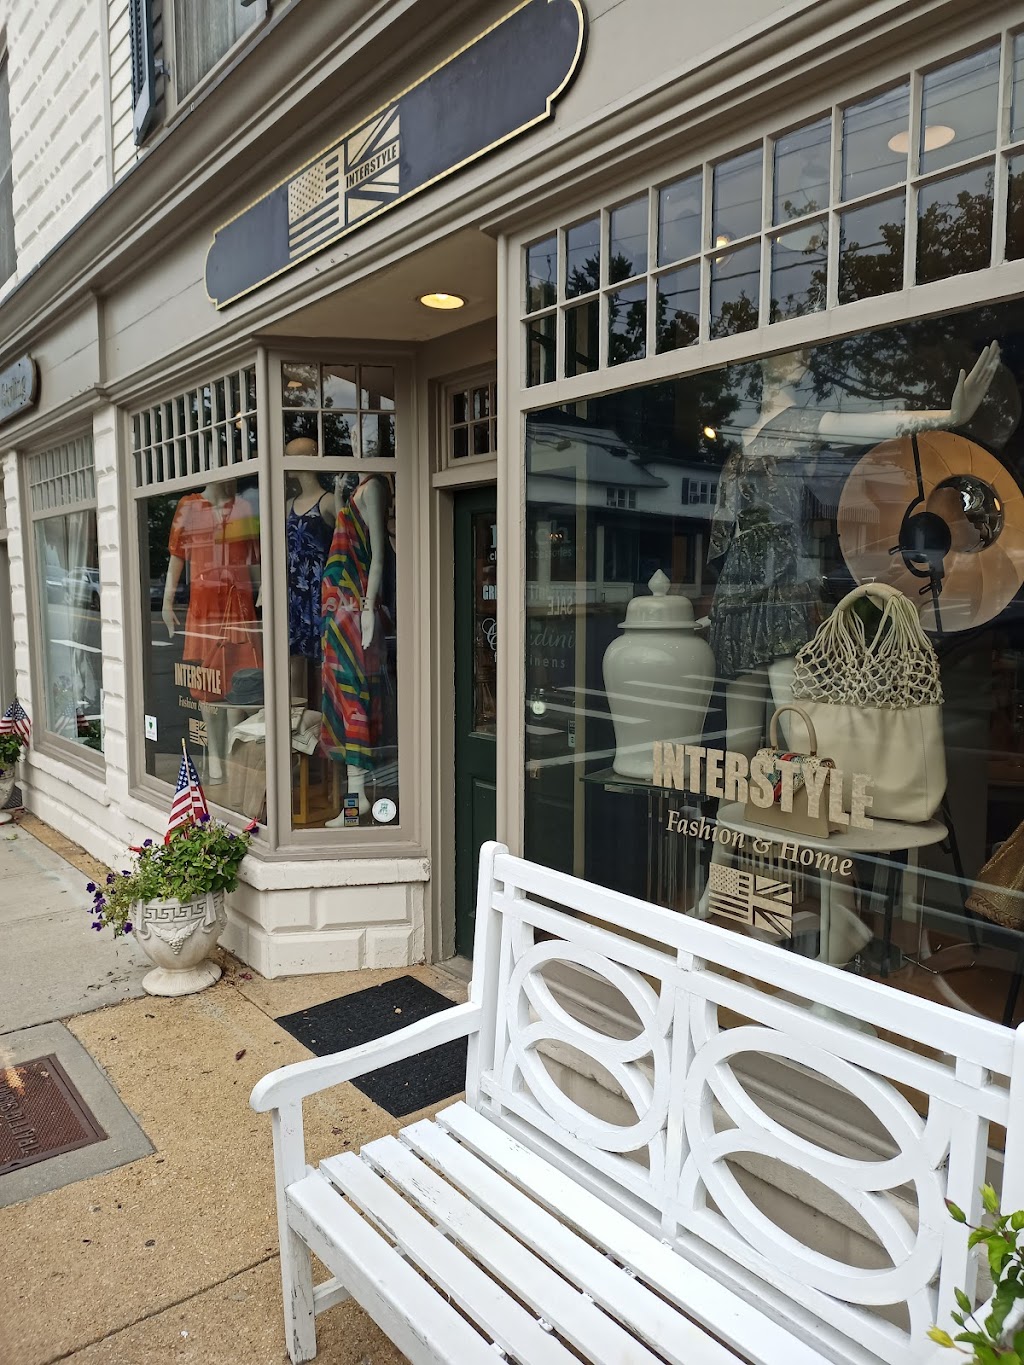 INTERSTYLE Fashion & Home | 28 Birch Hill Rd, Locust Valley, NY 11560, USA | Phone: (516) 801-6688